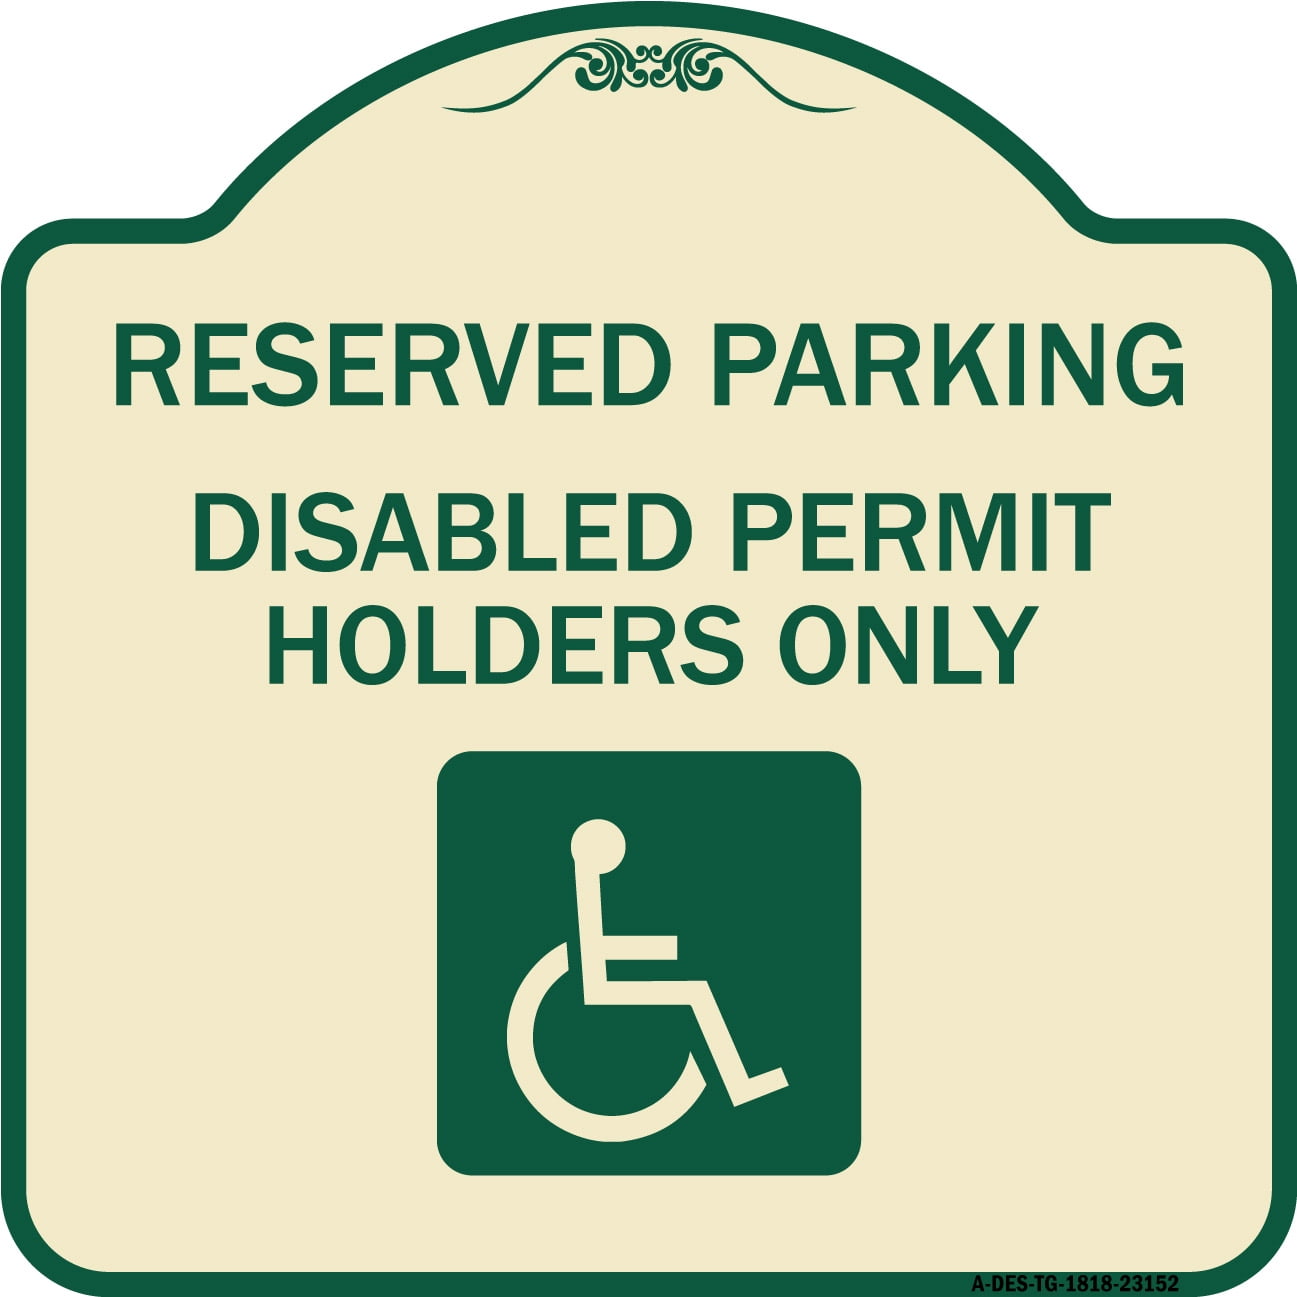 SignMission A-DES-GW-1818-23152 18 x 18 in. Designer Series Sign - Reserved  Parking - Disabled Permit Holders Only with Updated Access Symbol,  Green & White 